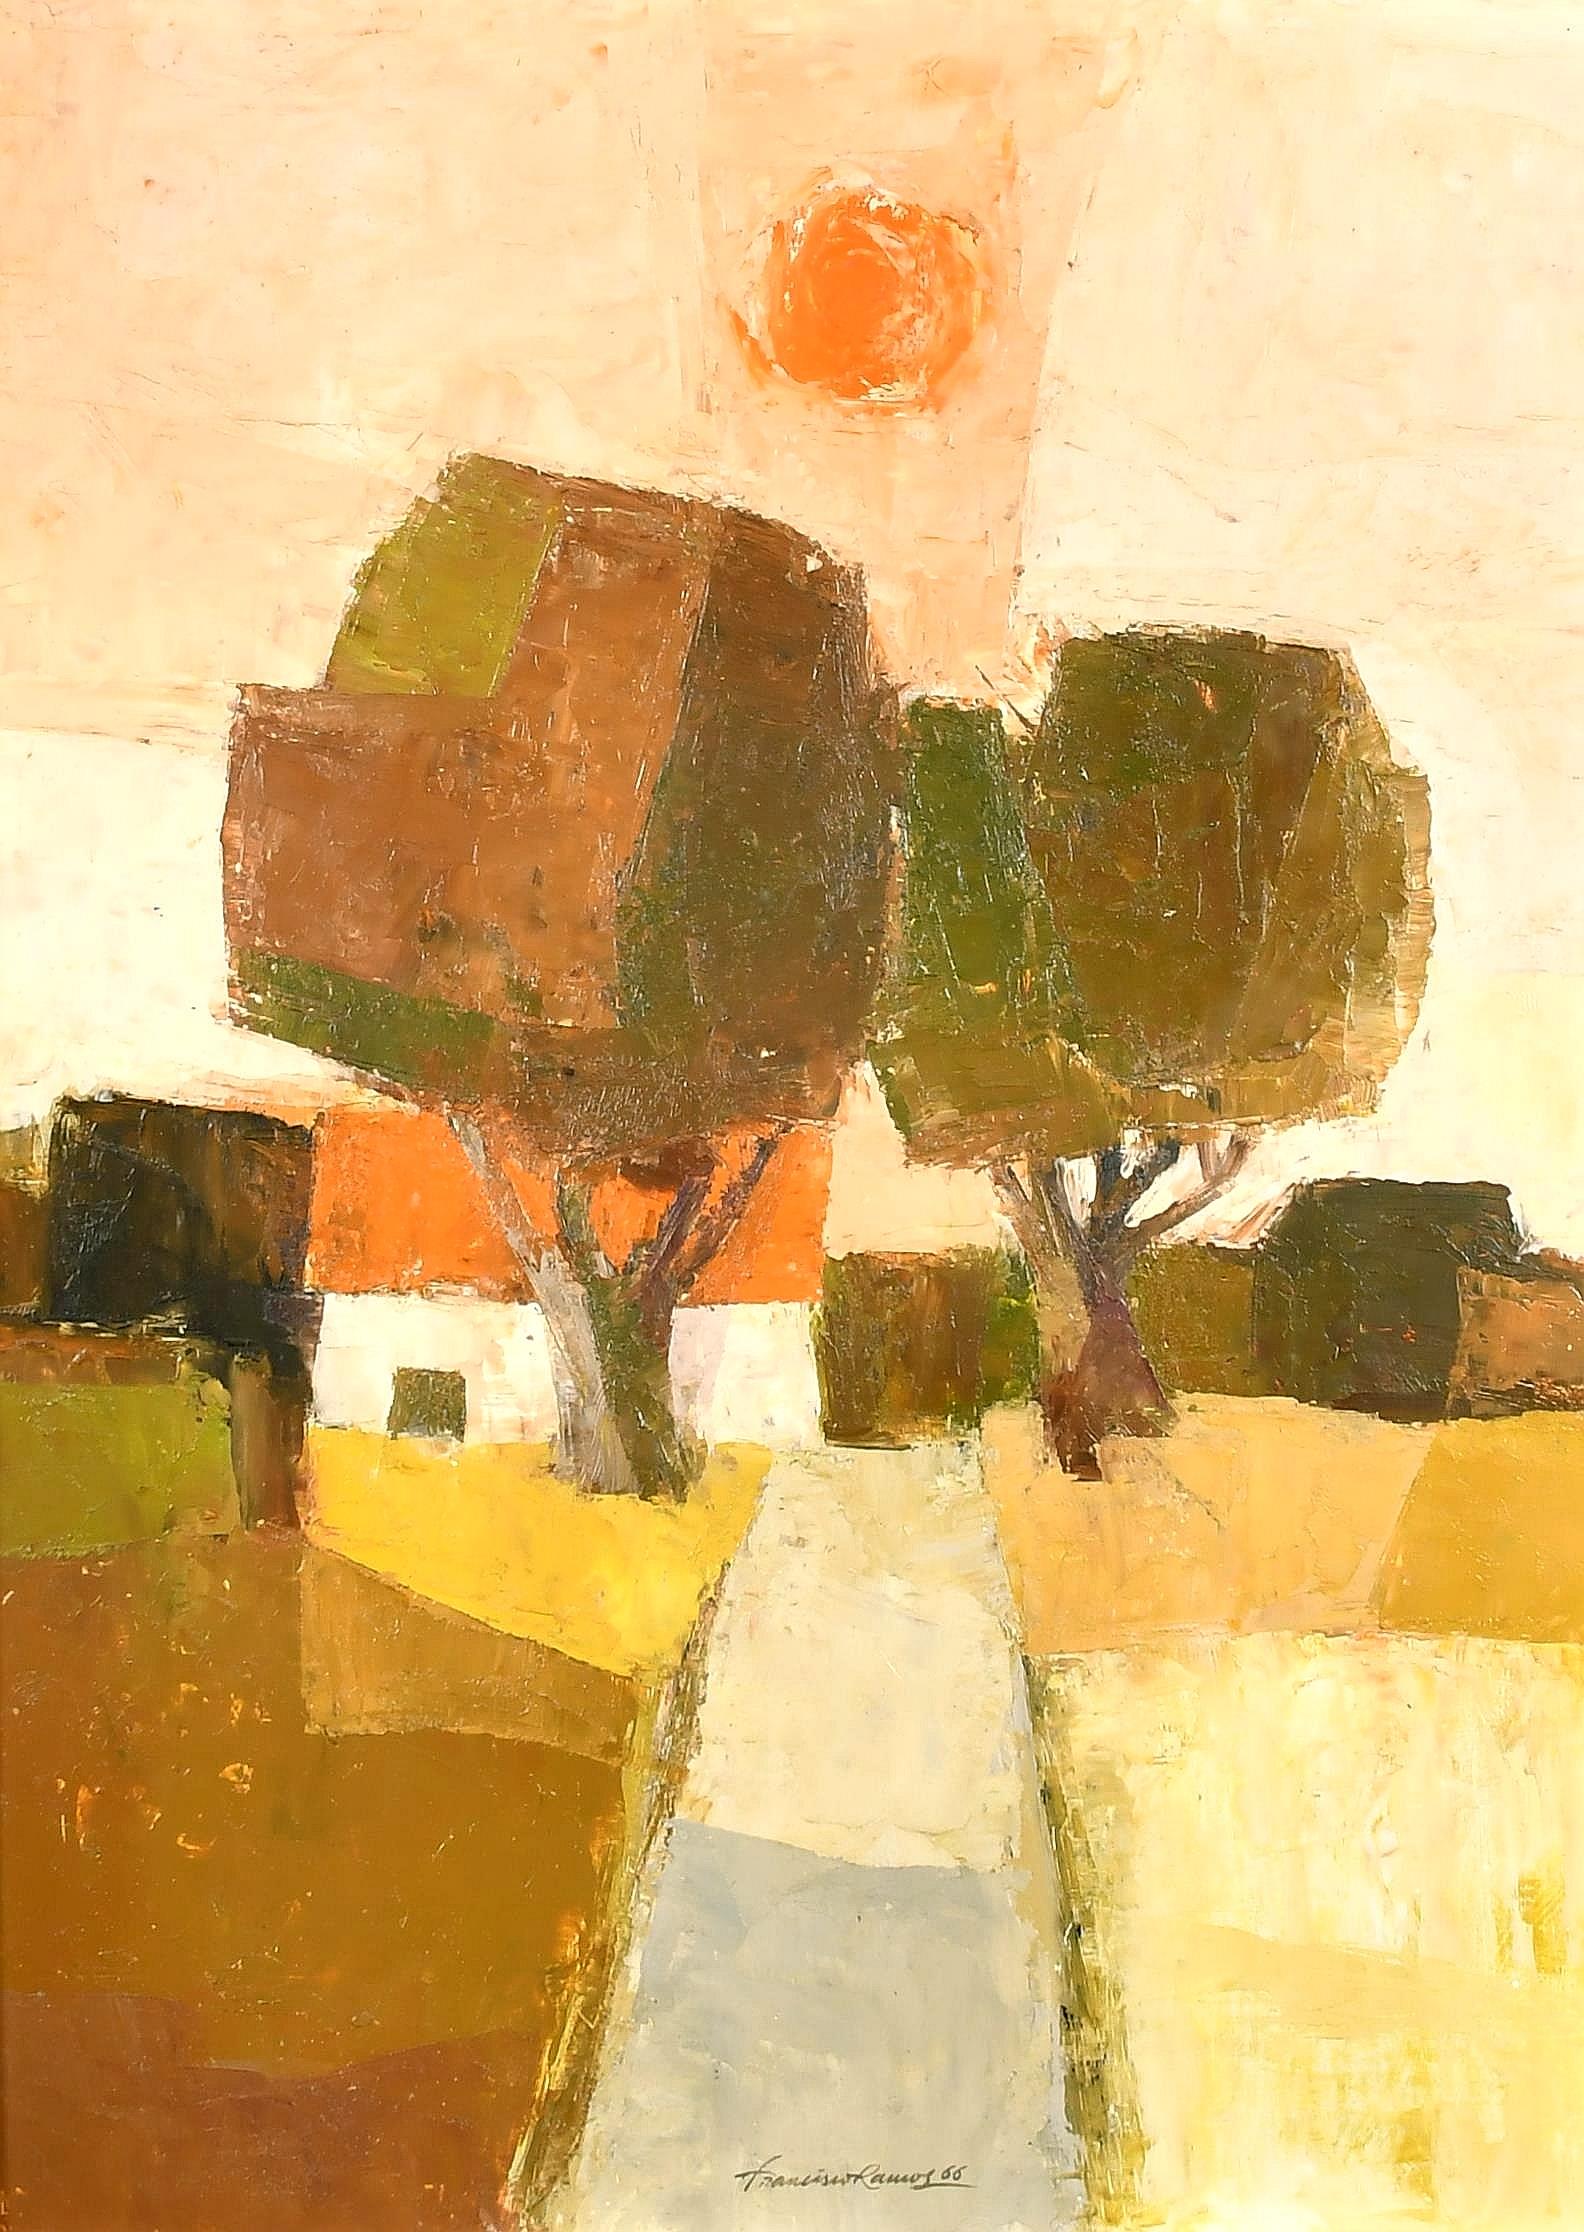 A beautiful signed and dated 1966 cubist oil on board depicting the sun setting over a Spanish landscape, by Francisco Ramos. Excellent quality work with a lovely warm feel. Signed and dated lower centre. Framed.

Artist: Francisco Ramos (Spanish,